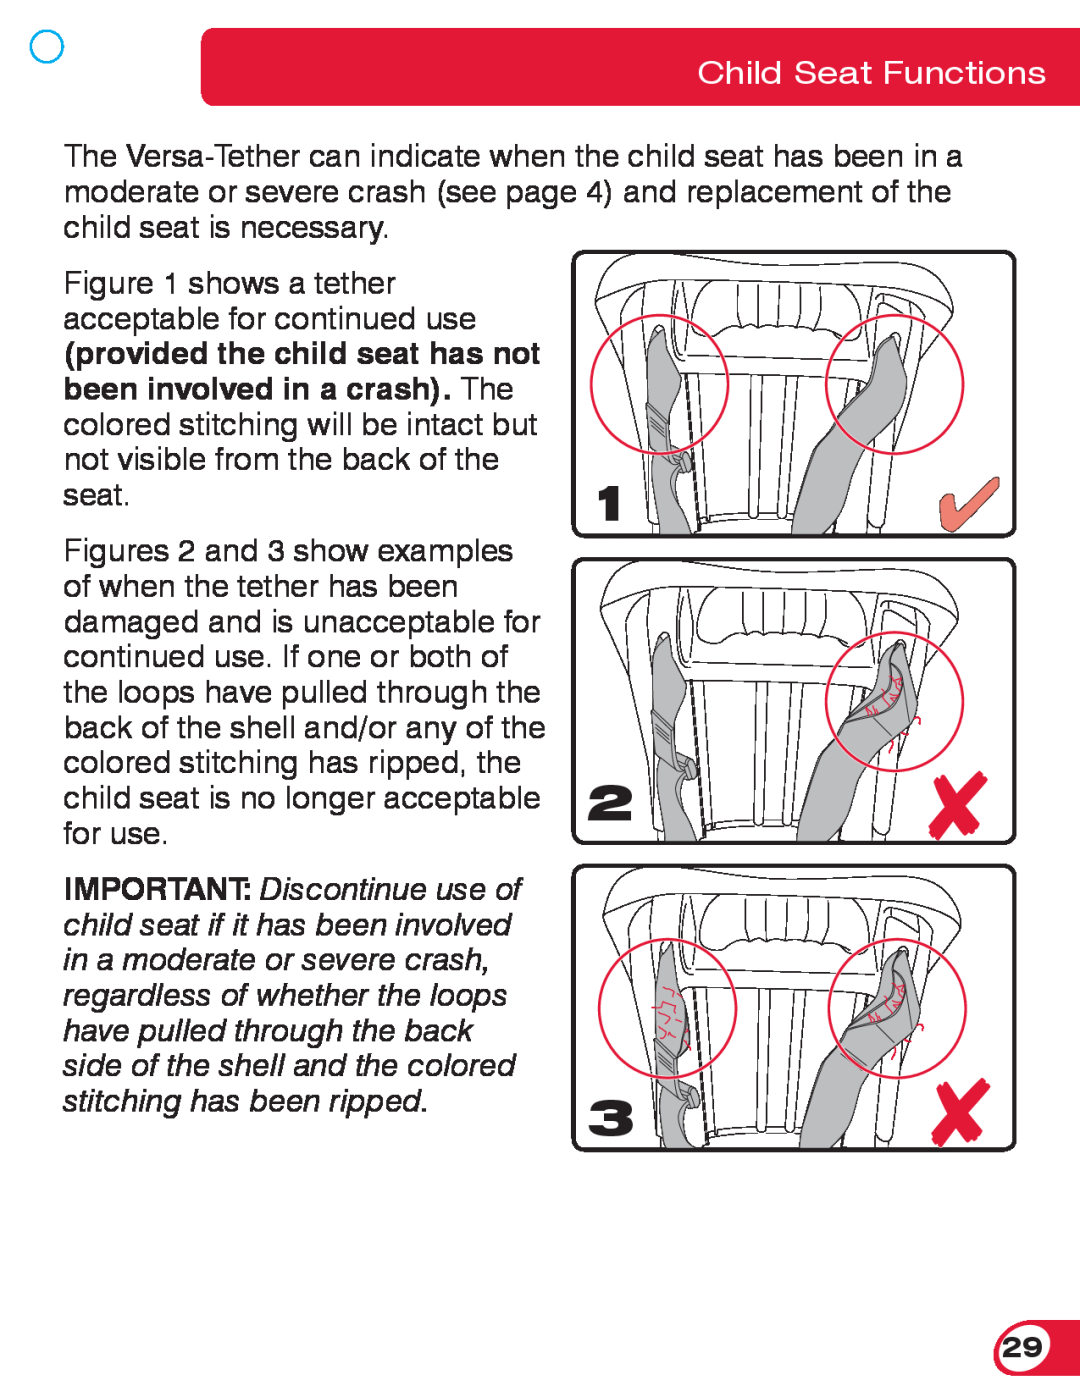 Britax 70 CS manual Child Seat Functions, shows a tether acceptable for continued use 